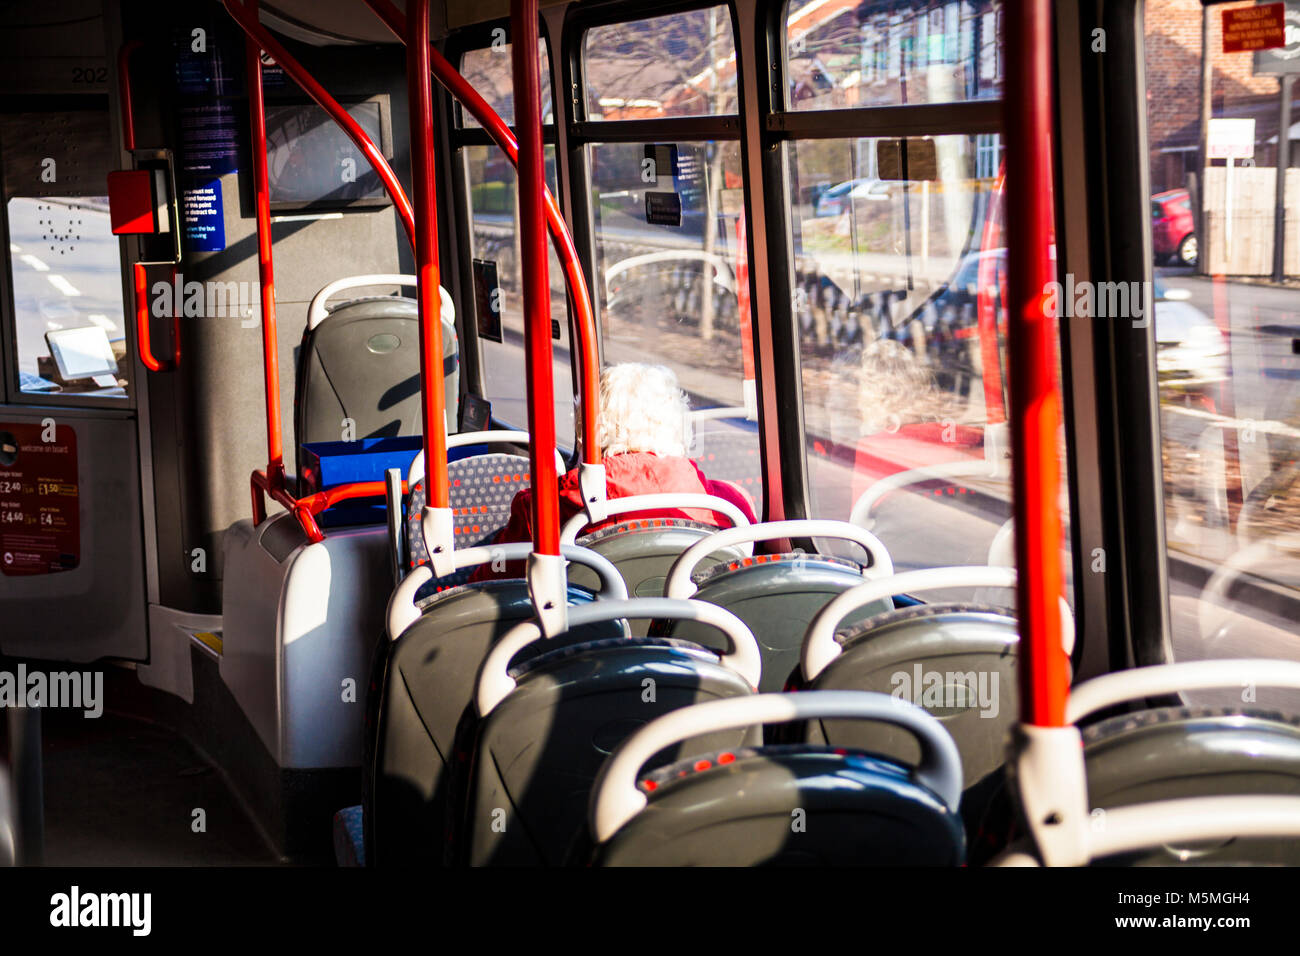 Lonely retired woman on the bus, lonelyness conception. Lonely person. Stock Photo